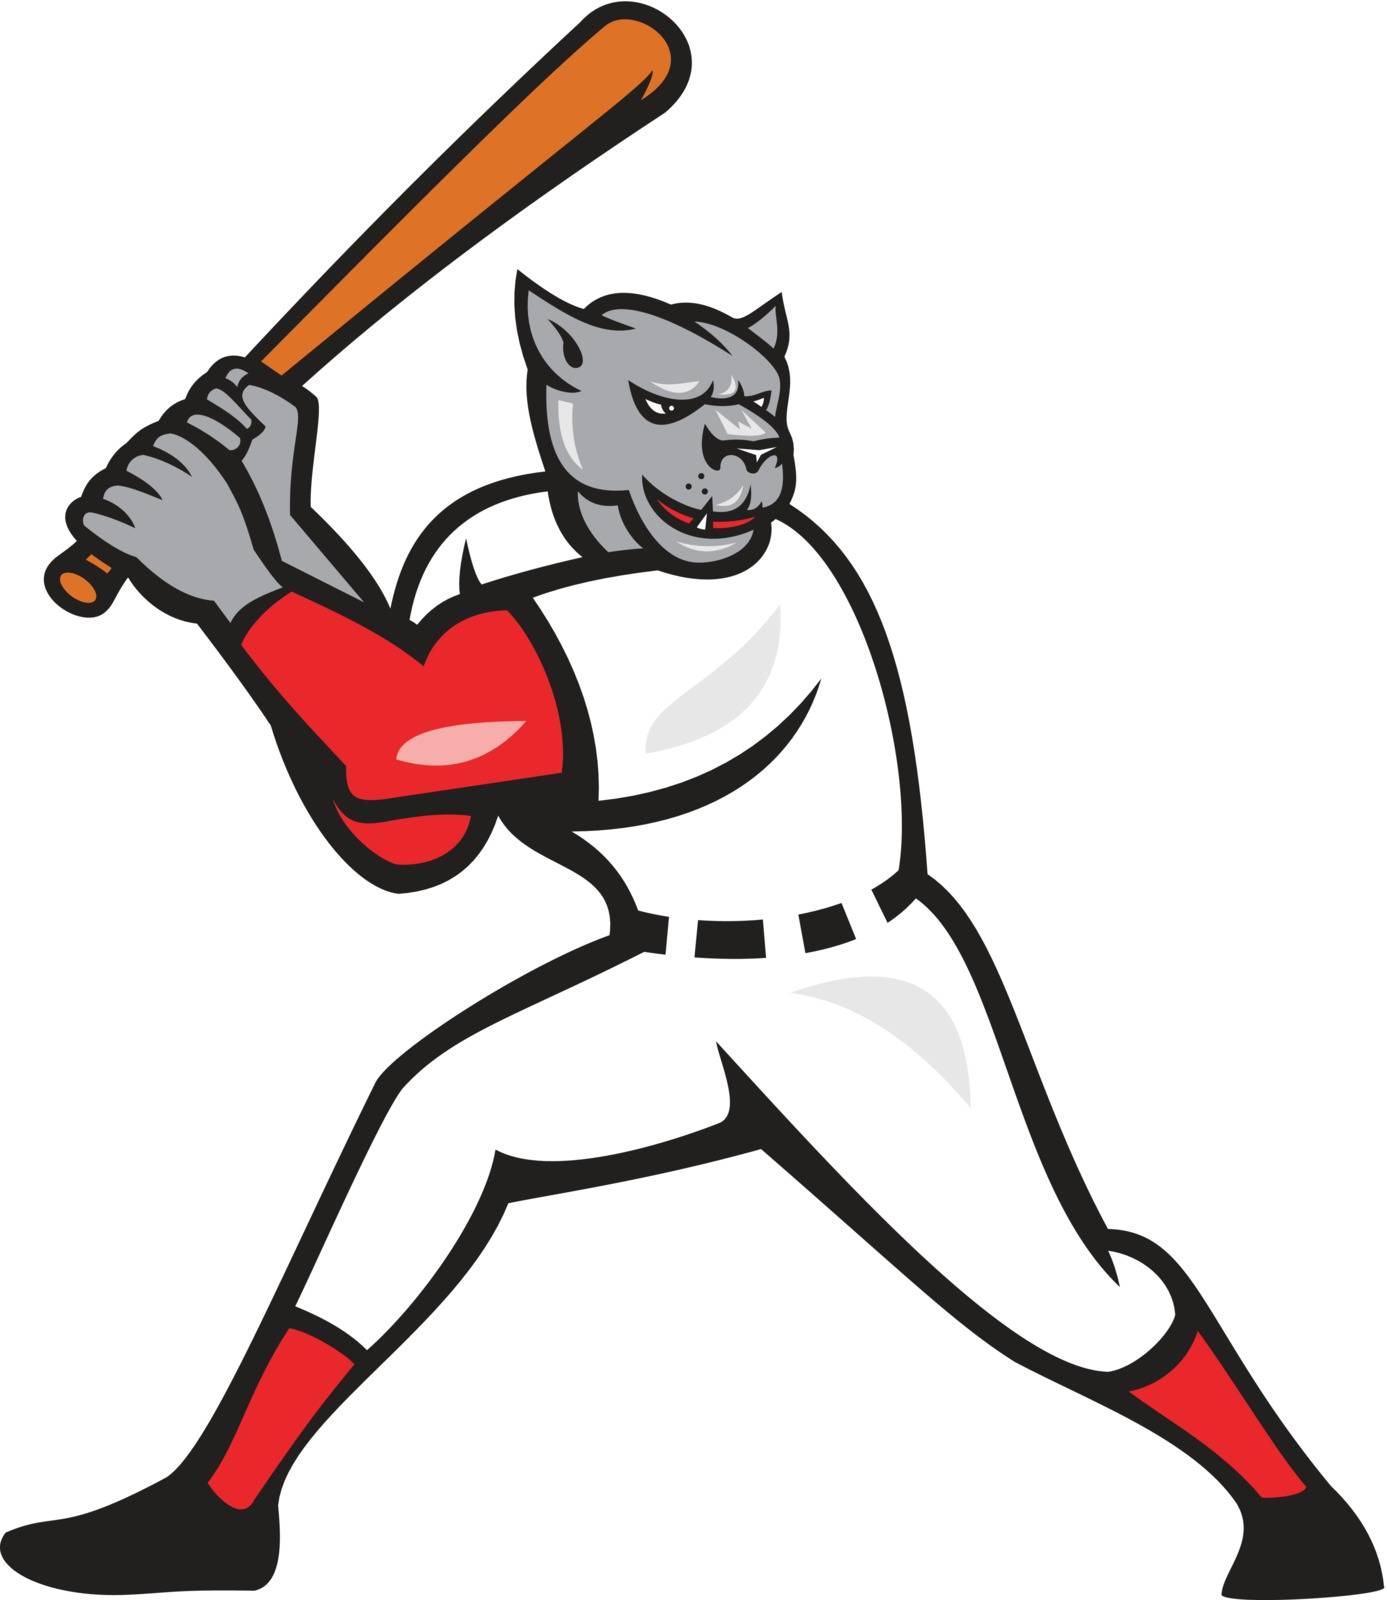 Illustration of a black panther baseball player batter hitter batting viewed from side done in cartoon style isolated on white background.